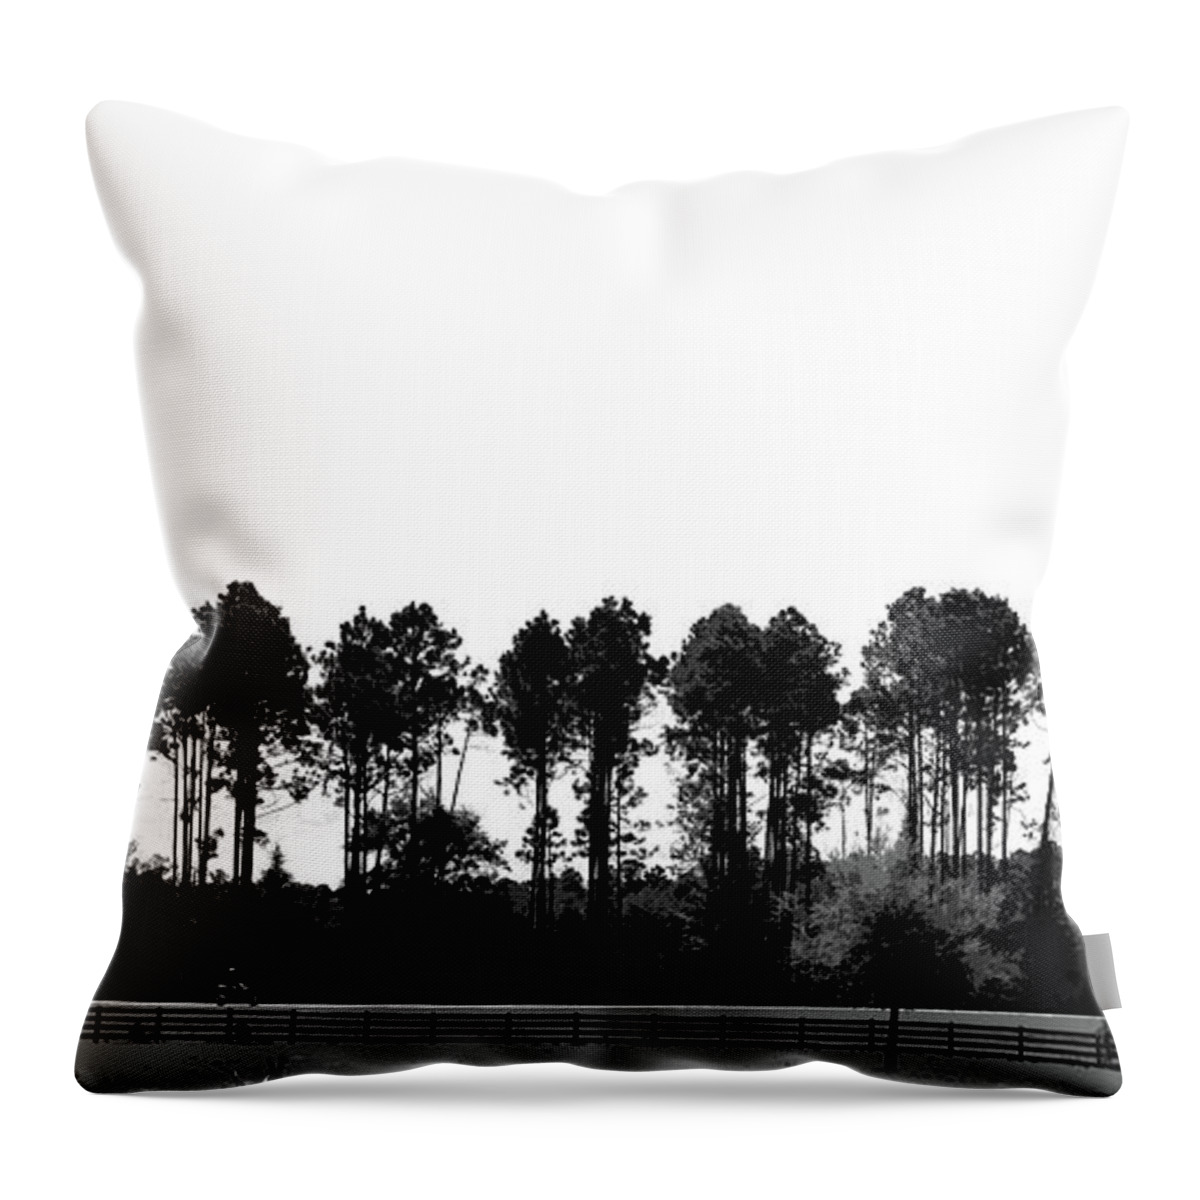 Trees Throw Pillow featuring the photograph The Trees by Neala McCarten